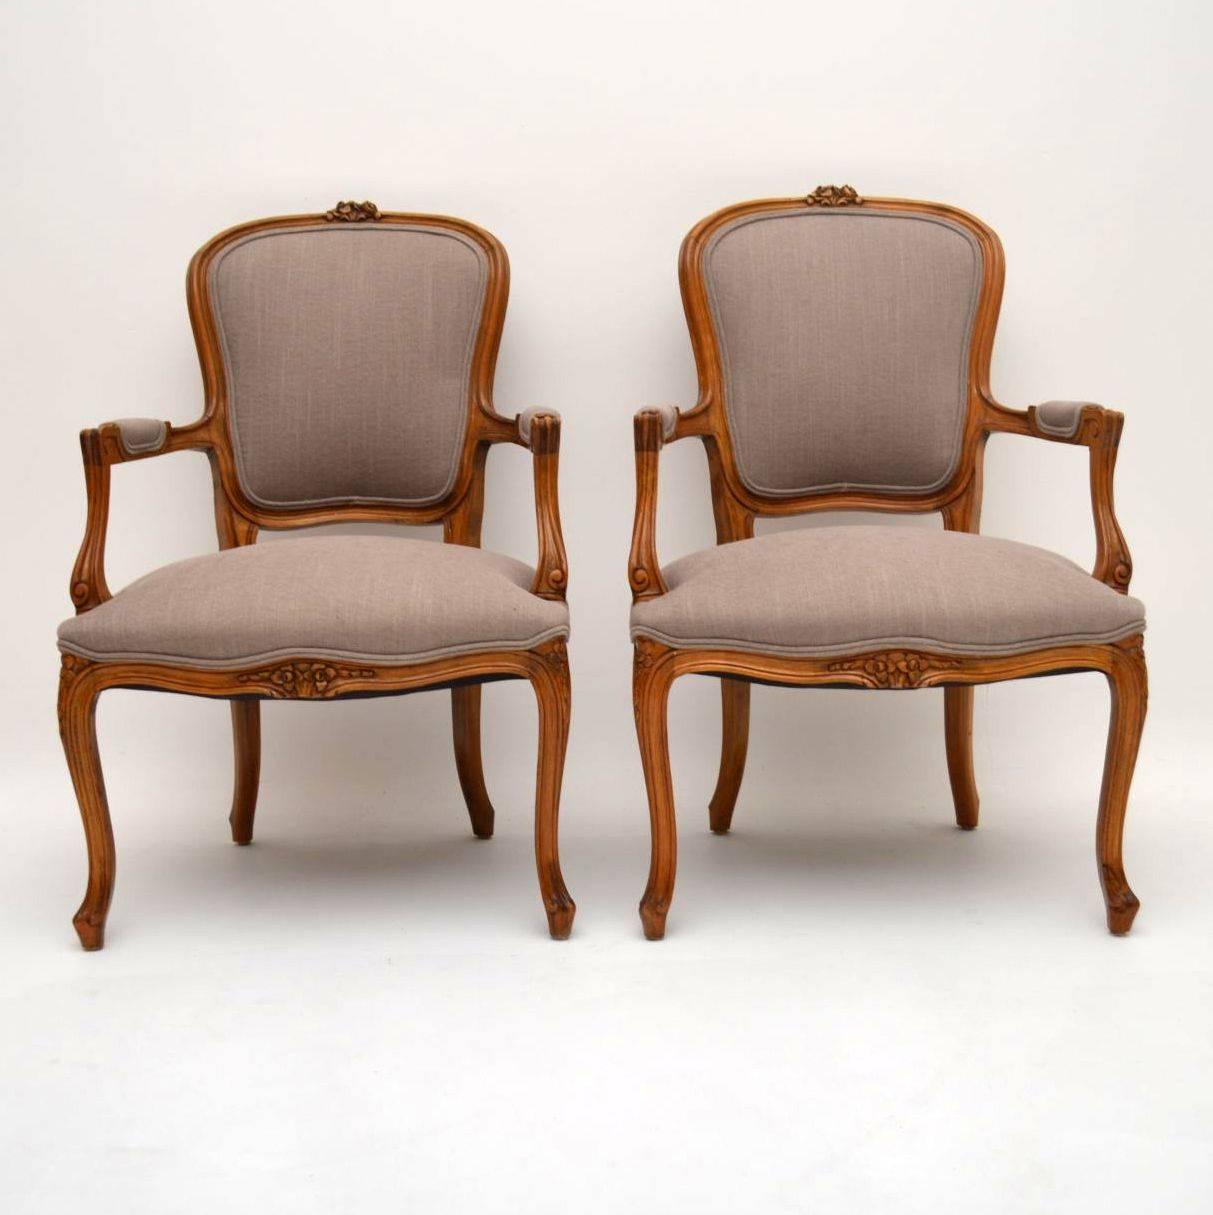 Pair of antique carved walnut French salon armchairs in excellent condition and newly re-upholstered. The frames are finely carved and have a great shape. The neutral colored fabric is double piped on the edges. I would date them to around the